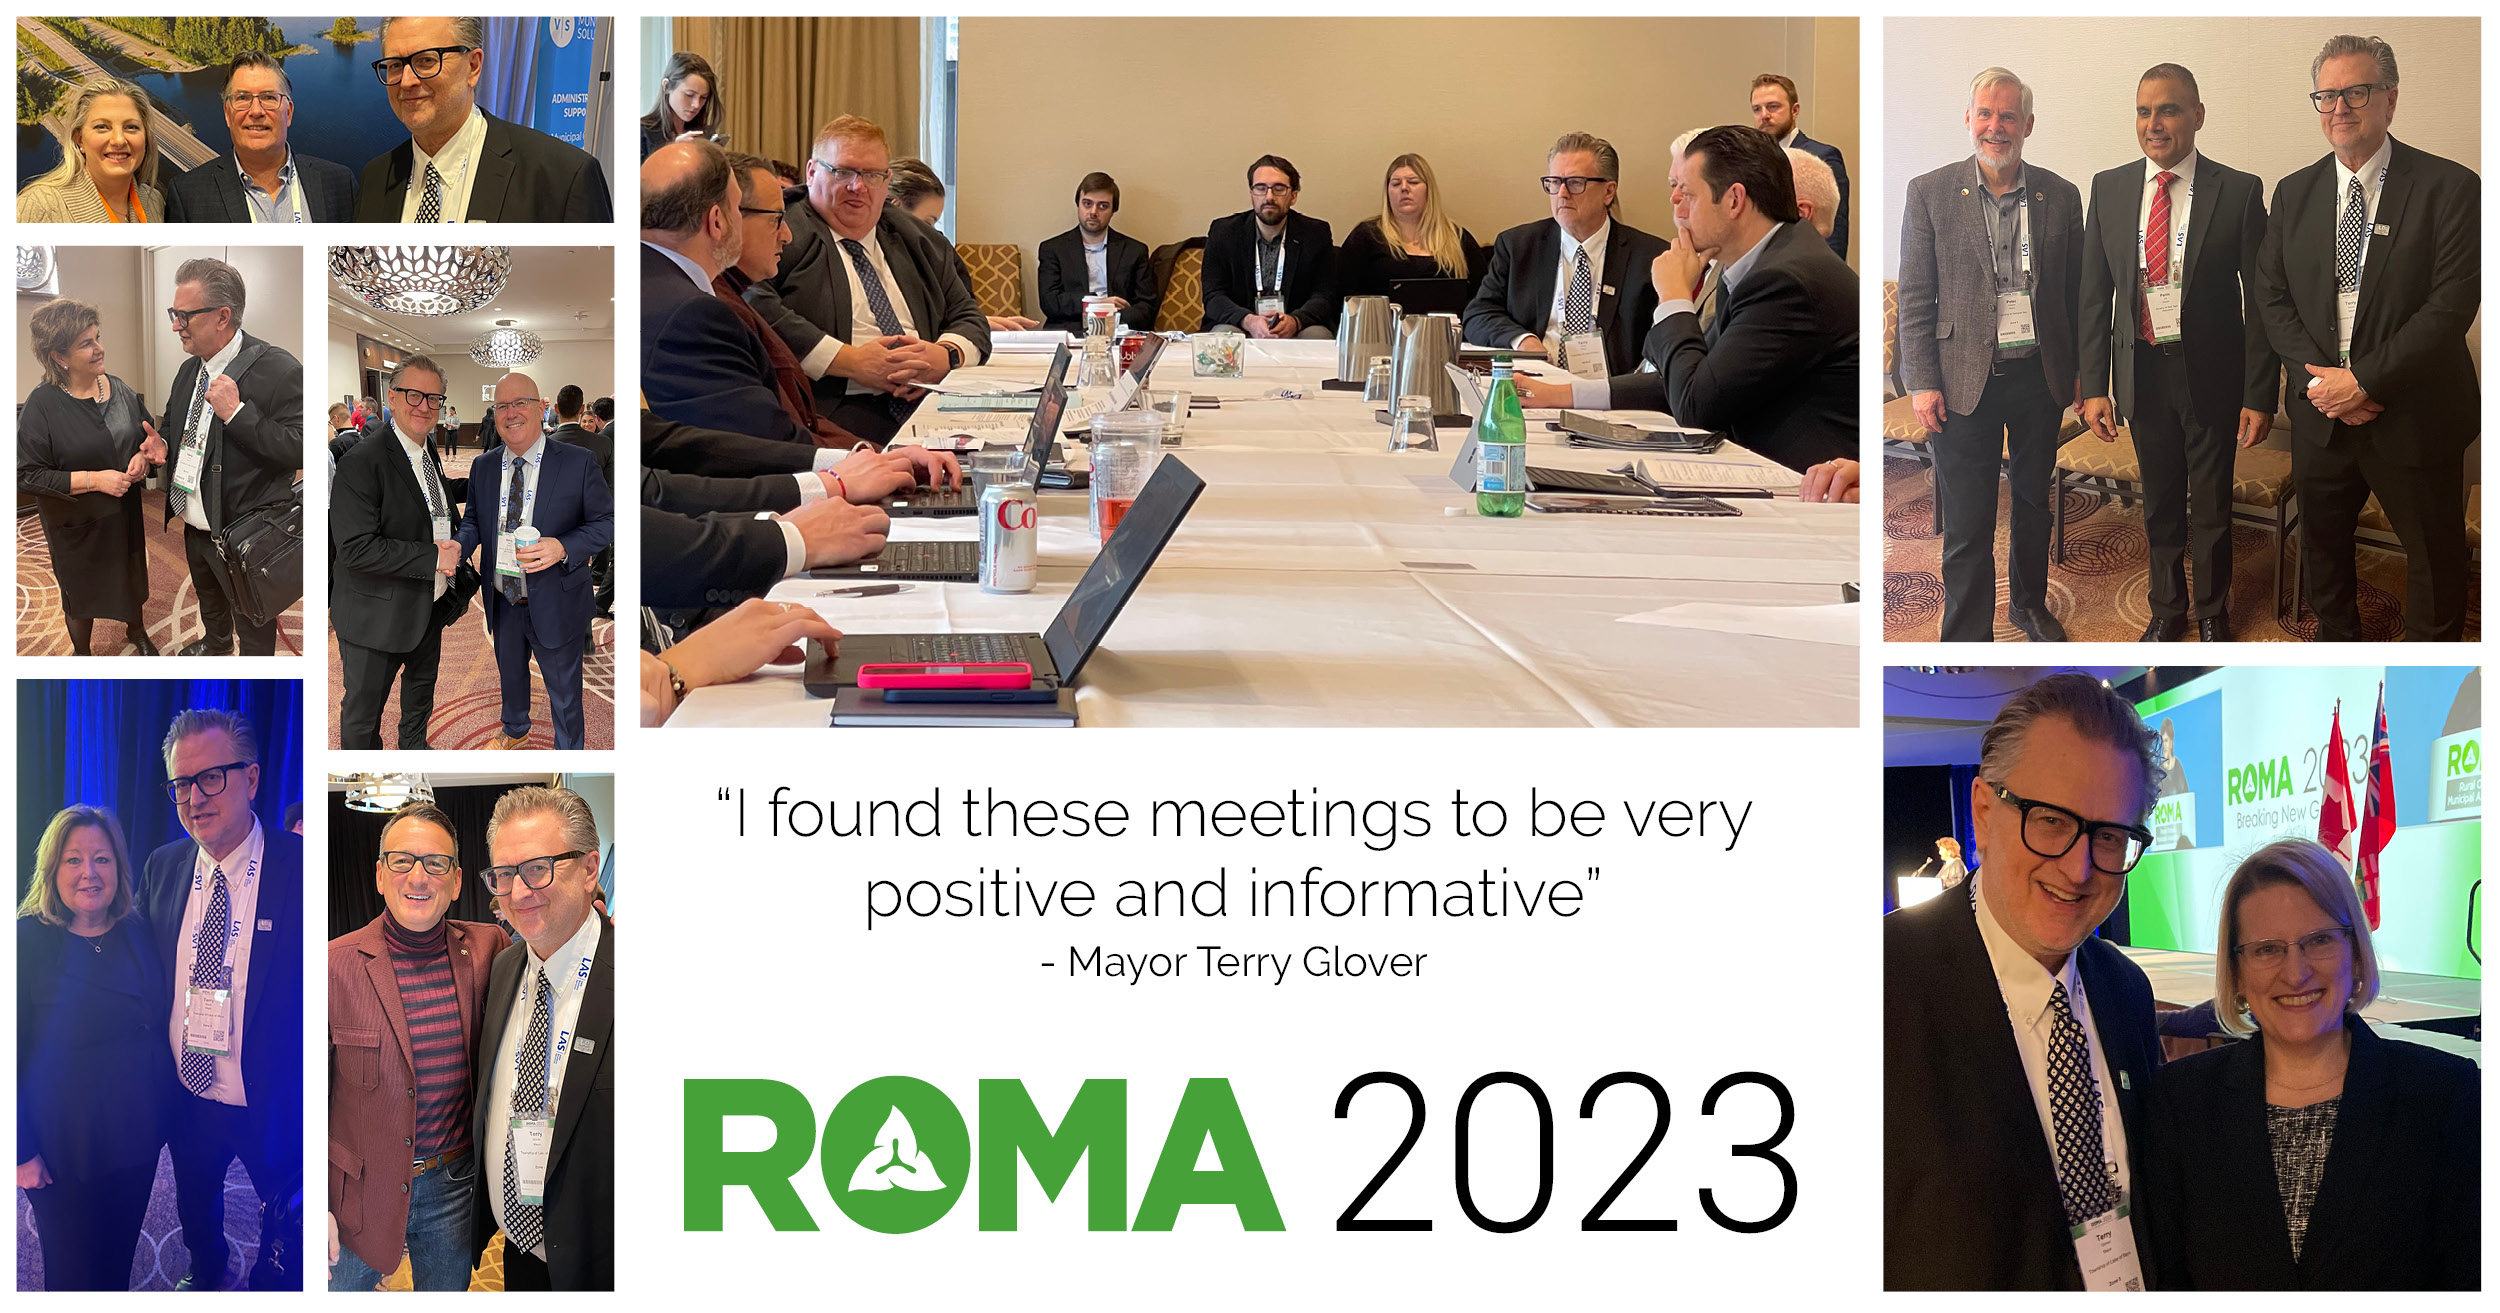 ROMA 2023 Image with Terry Glover quote that says he found these meetings to be very positive and informative